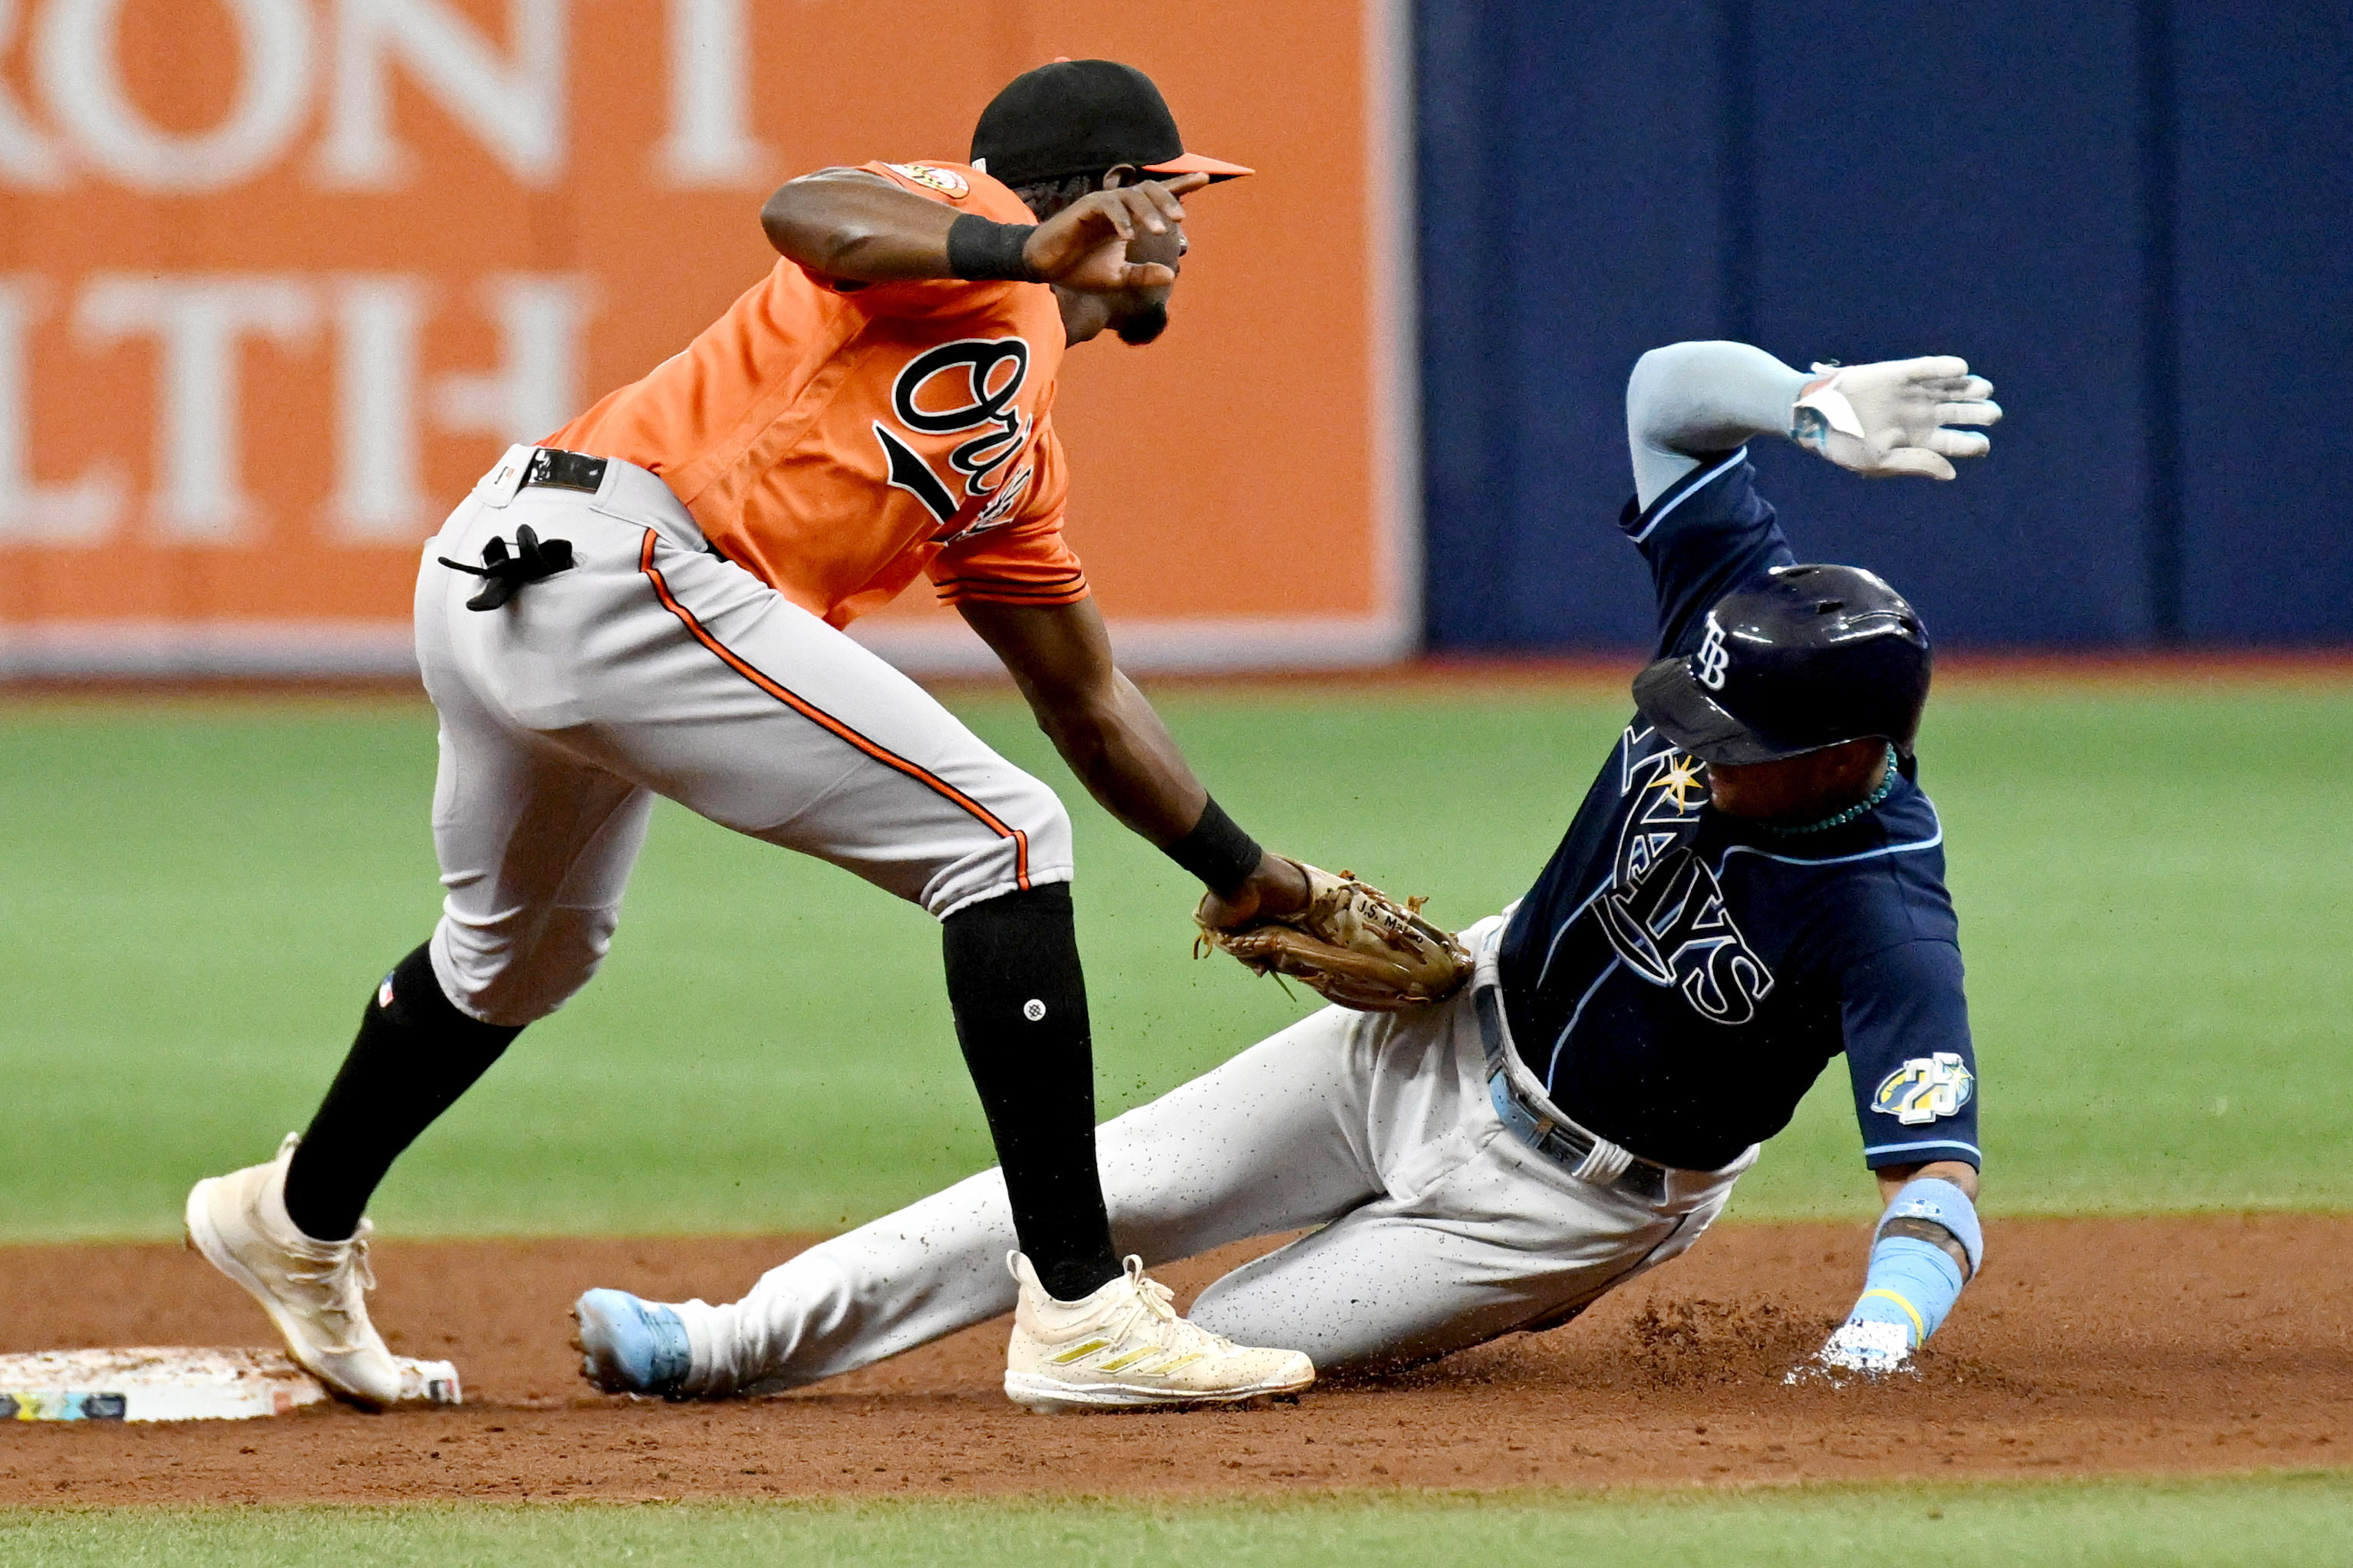 Orioles-Rays series preview: Four games for first place in AL East